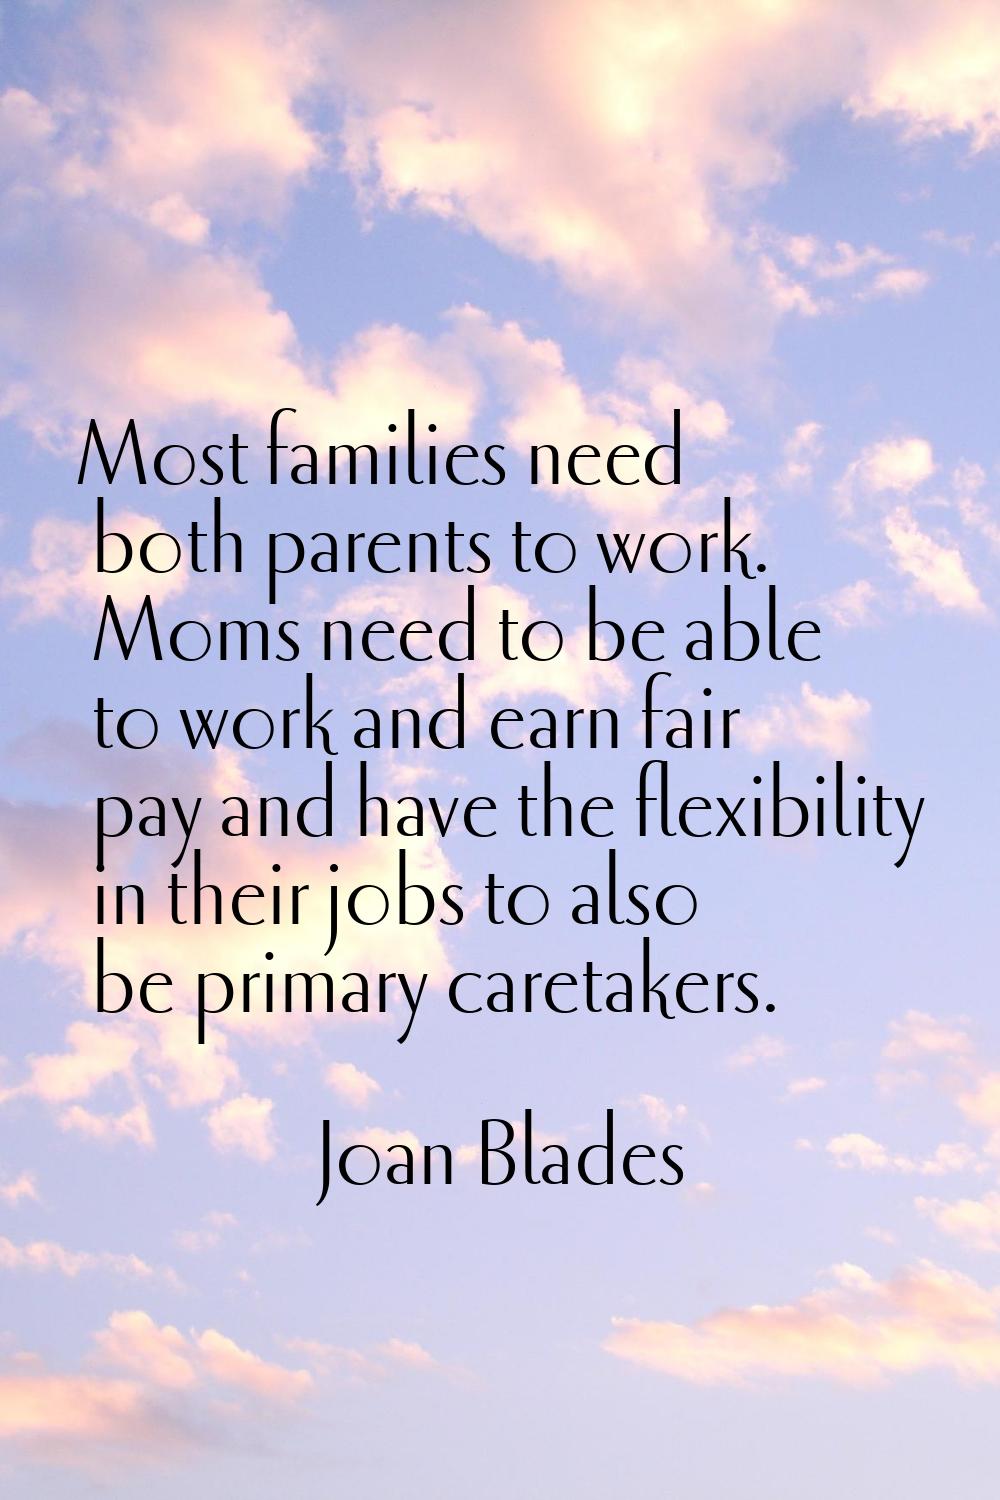 Most families need both parents to work. Moms need to be able to work and earn fair pay and have th